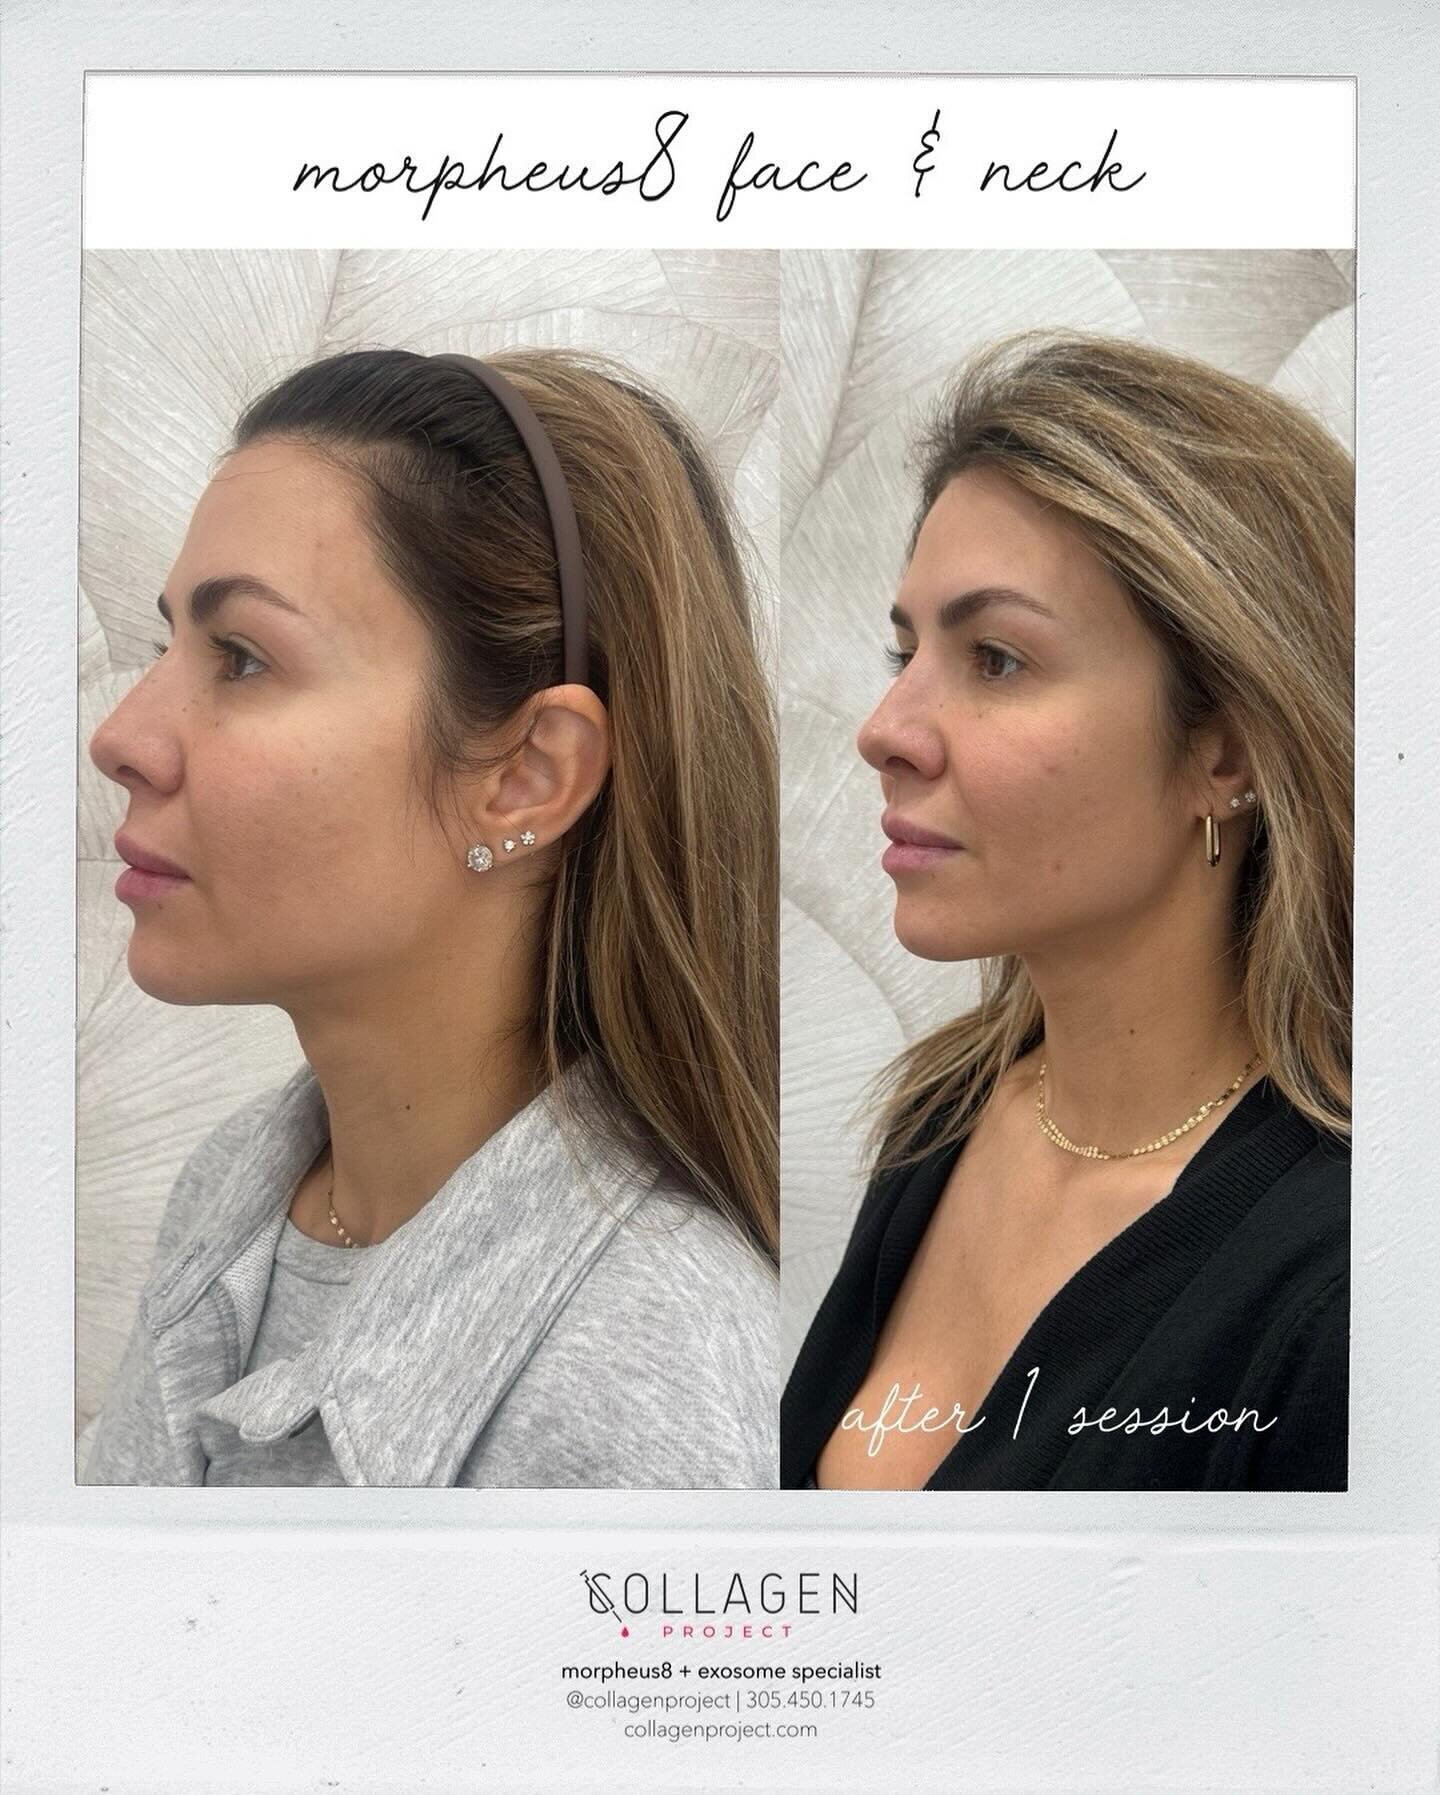 Jawline Contour 
If your jawline isn&rsquo;t snatched the way you want it to be, a few sessions of Morpheus8 can help you create those selfie profile shots you&rsquo;ve been dreaming about.
Morpheus8 helps with submental fullness remodeling (or, doub